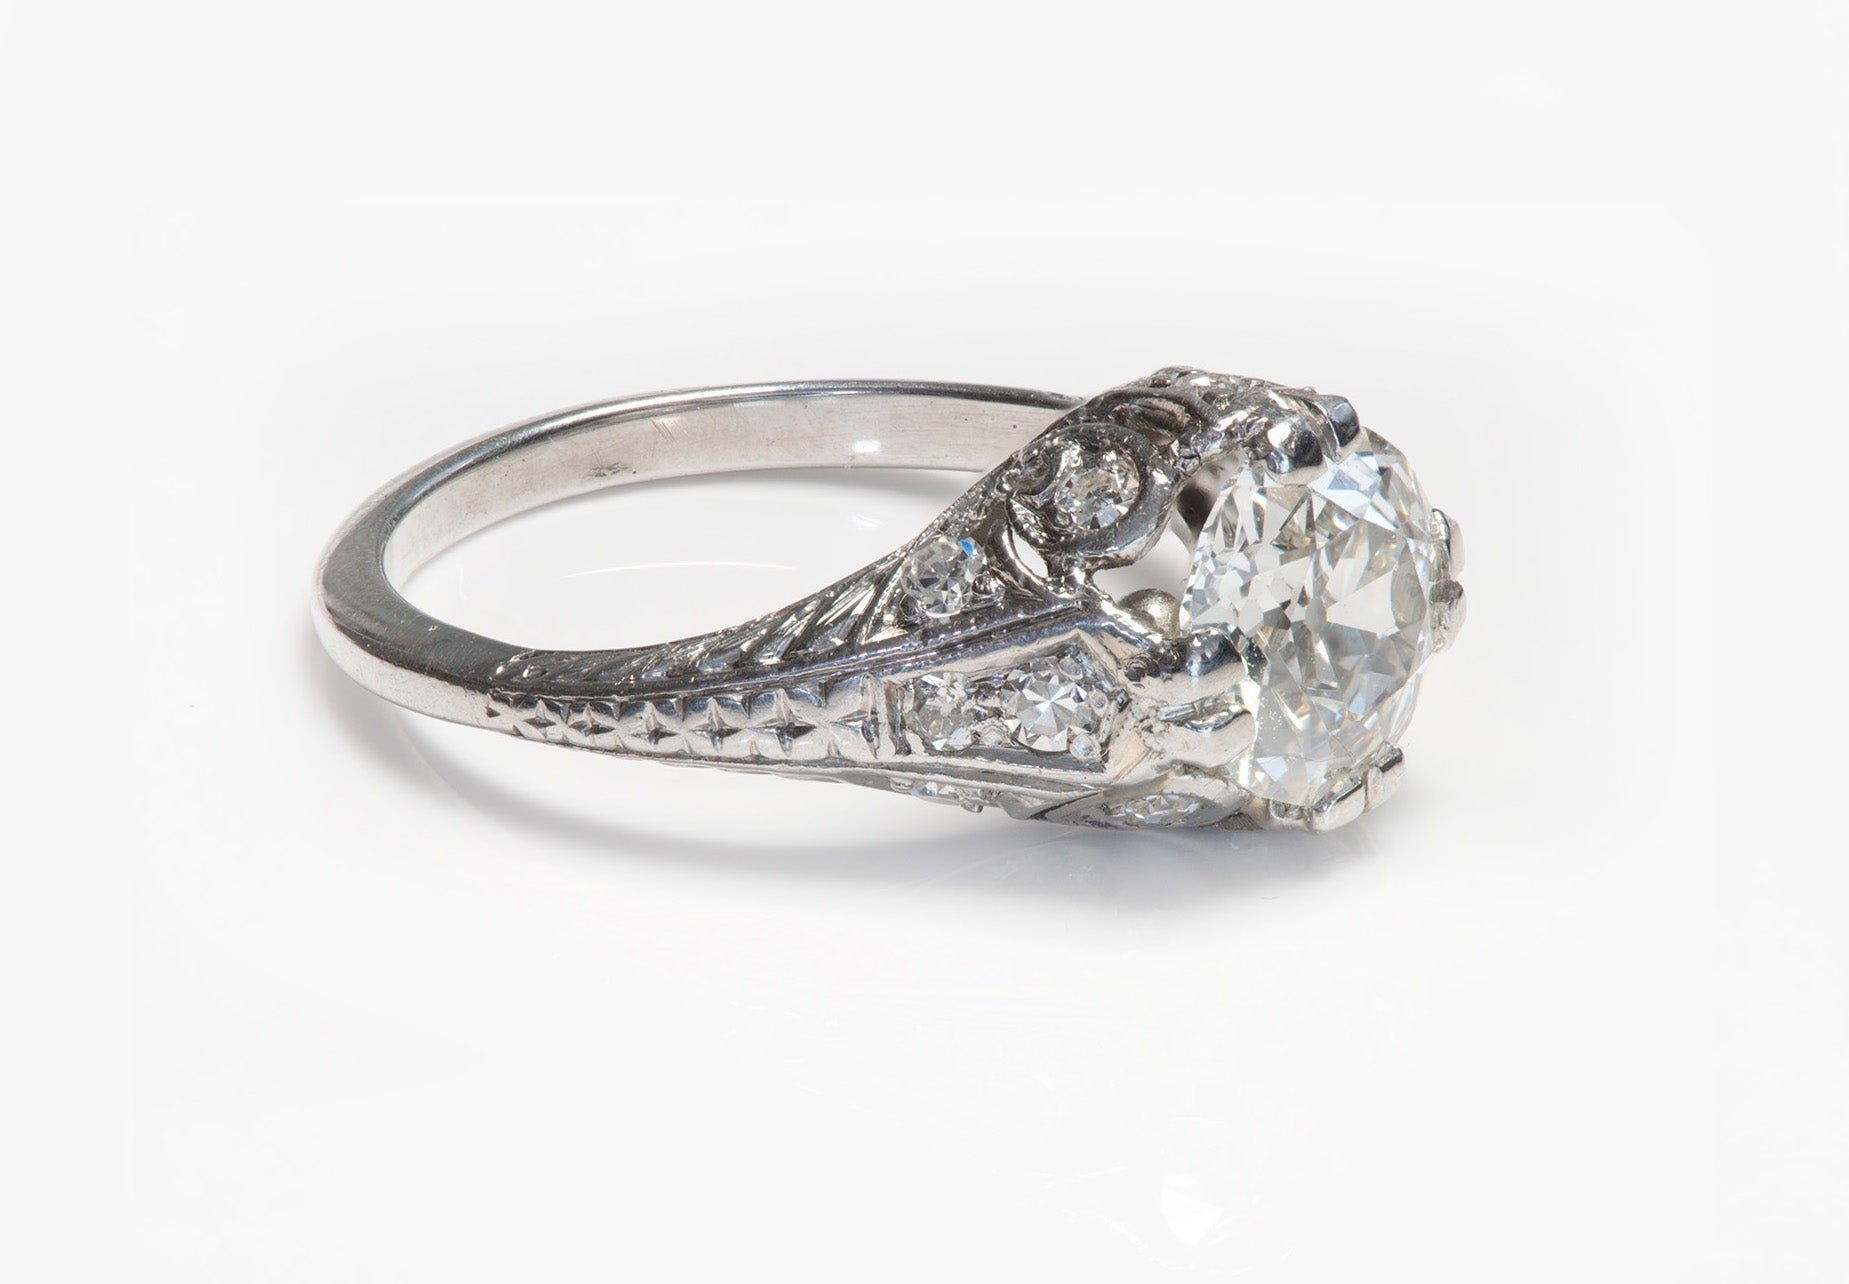 How To Choose An Engagement Ring: Not As Easy As You'd Think - DSF Antique Jewelry